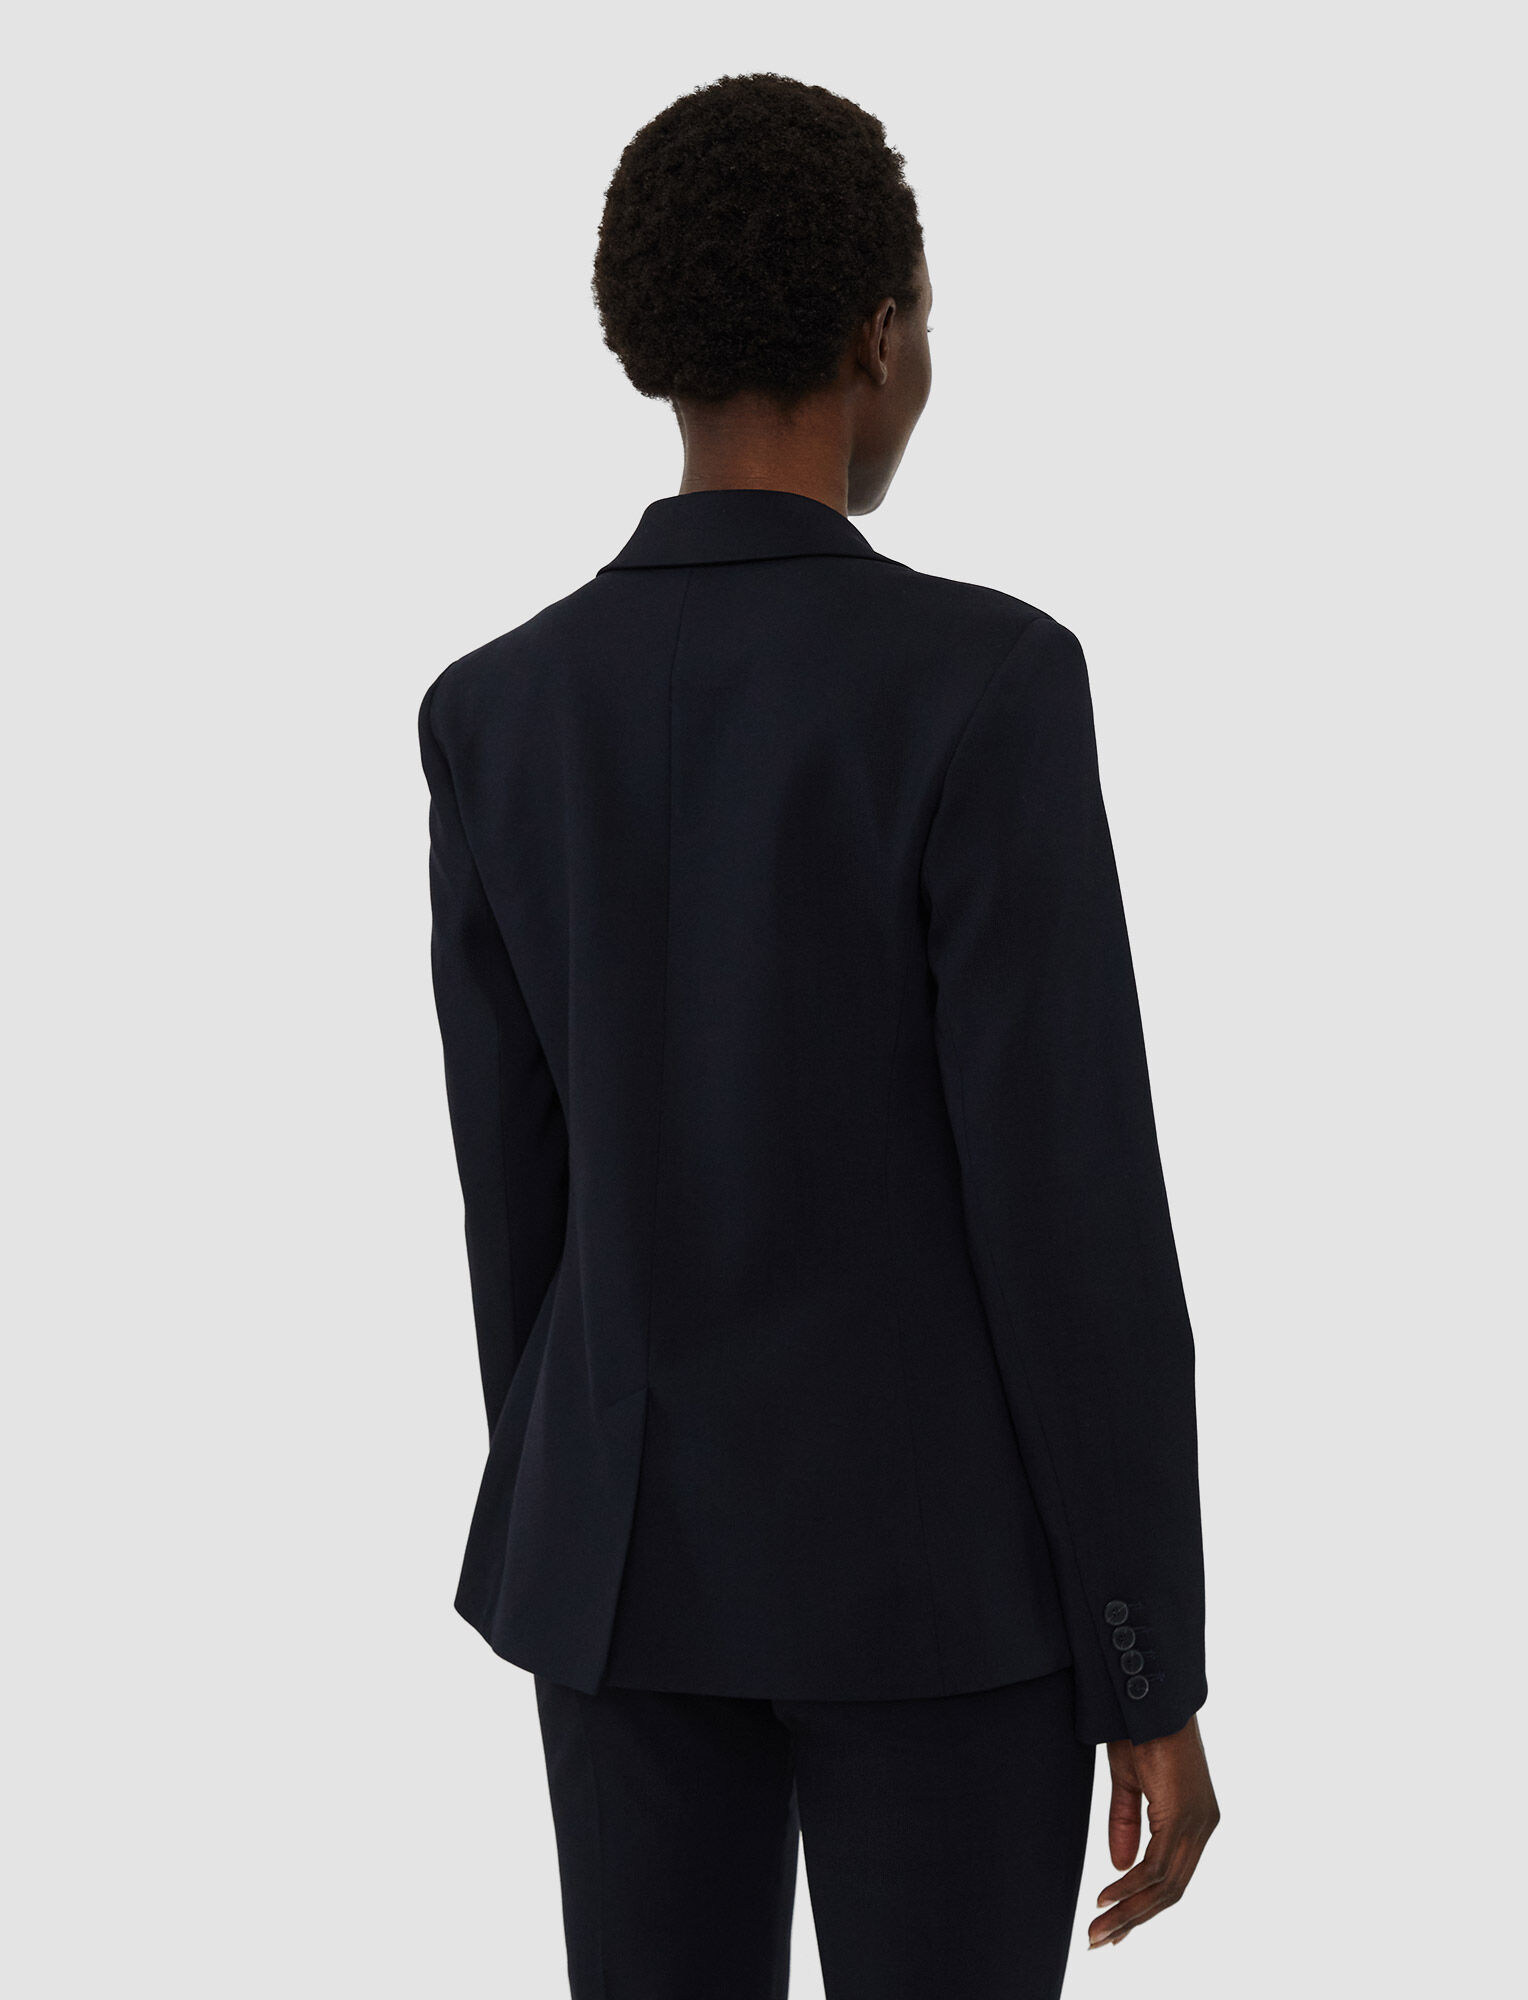 Joseph, Tailoring Wool Stretch Glenview Jacket, in Navy